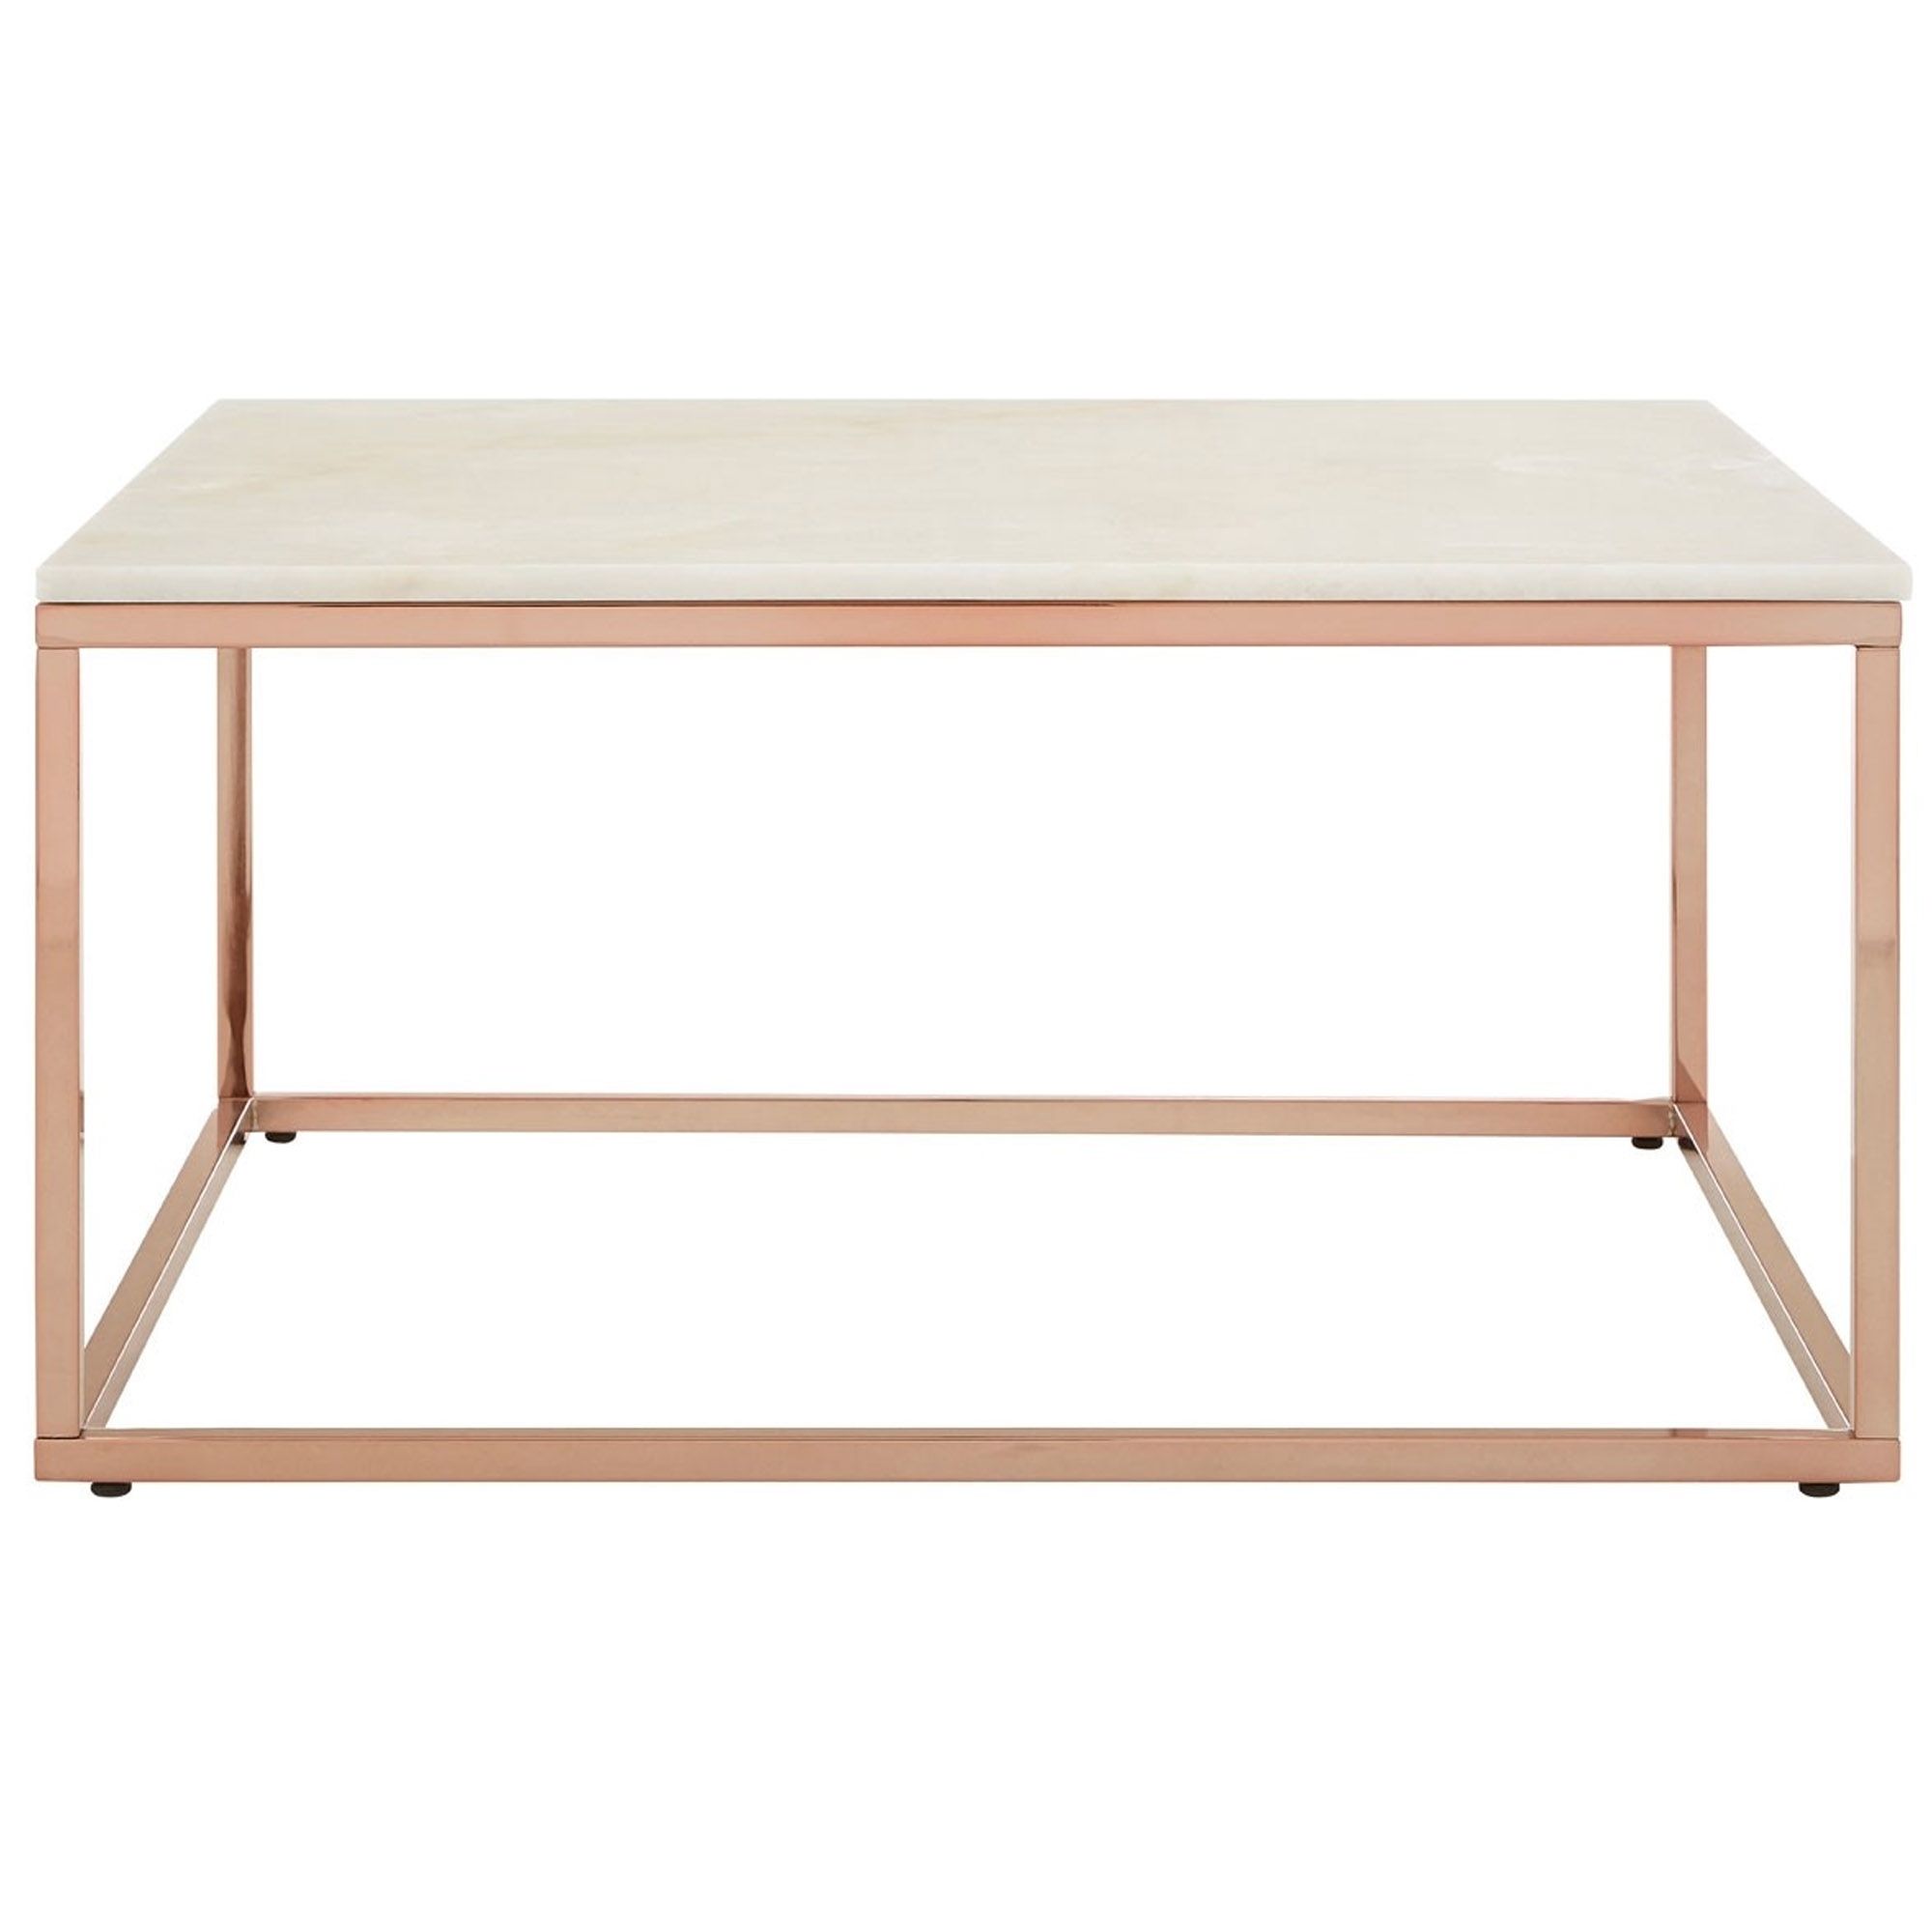 Rose Gold Allure Square Coffee Table | Contemporary Lounge Furniture Within Rose Gold Coffee Tables (View 12 of 20)